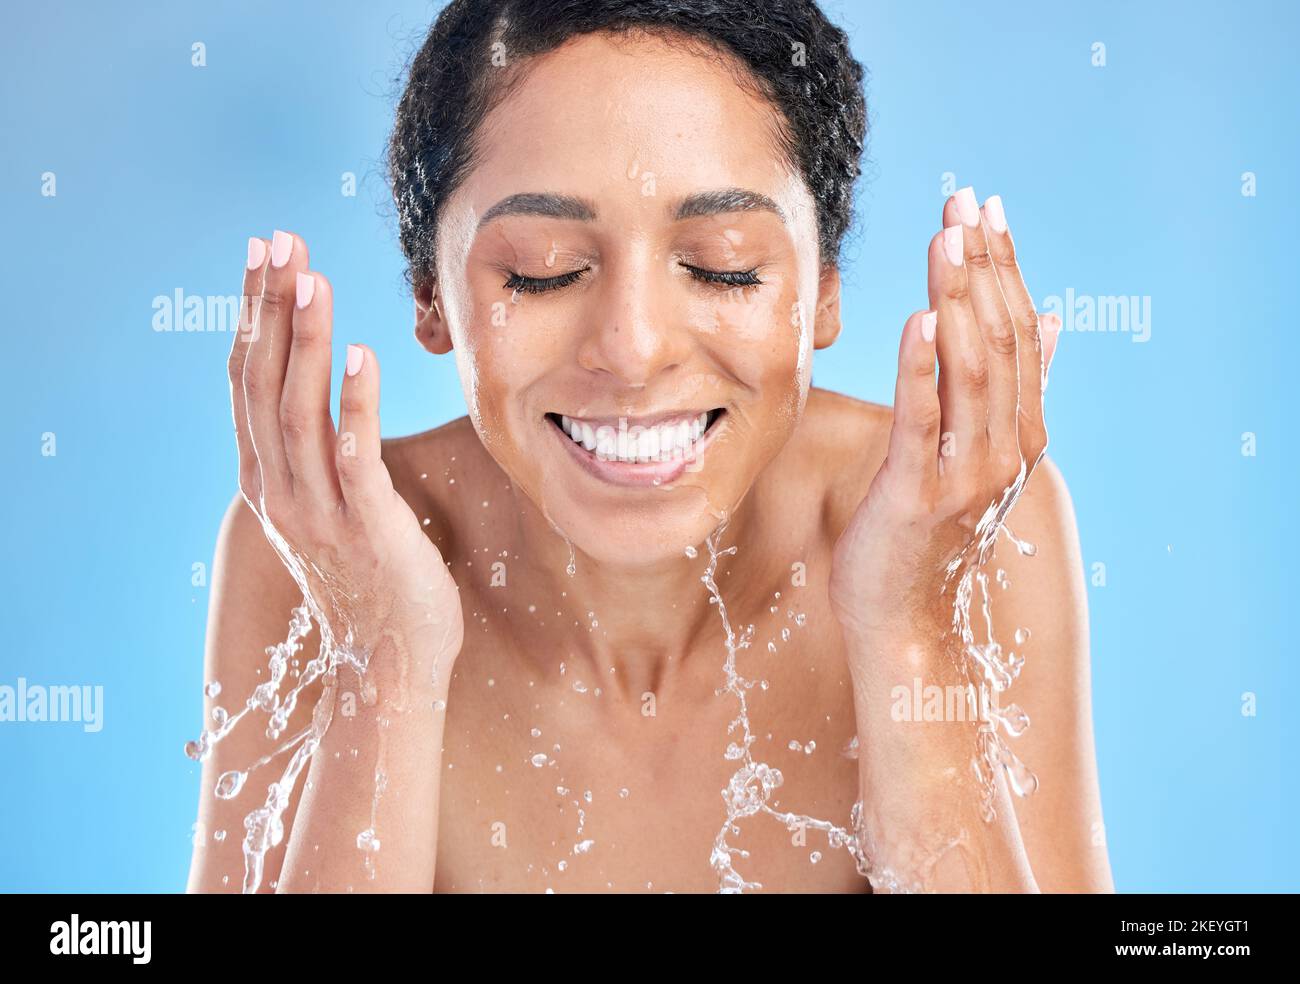 Water splash black woman cleaning face on blue background for health, beauty and skin care morning routine. Skincare, luxury cosmetics and happy woman Stock Photo